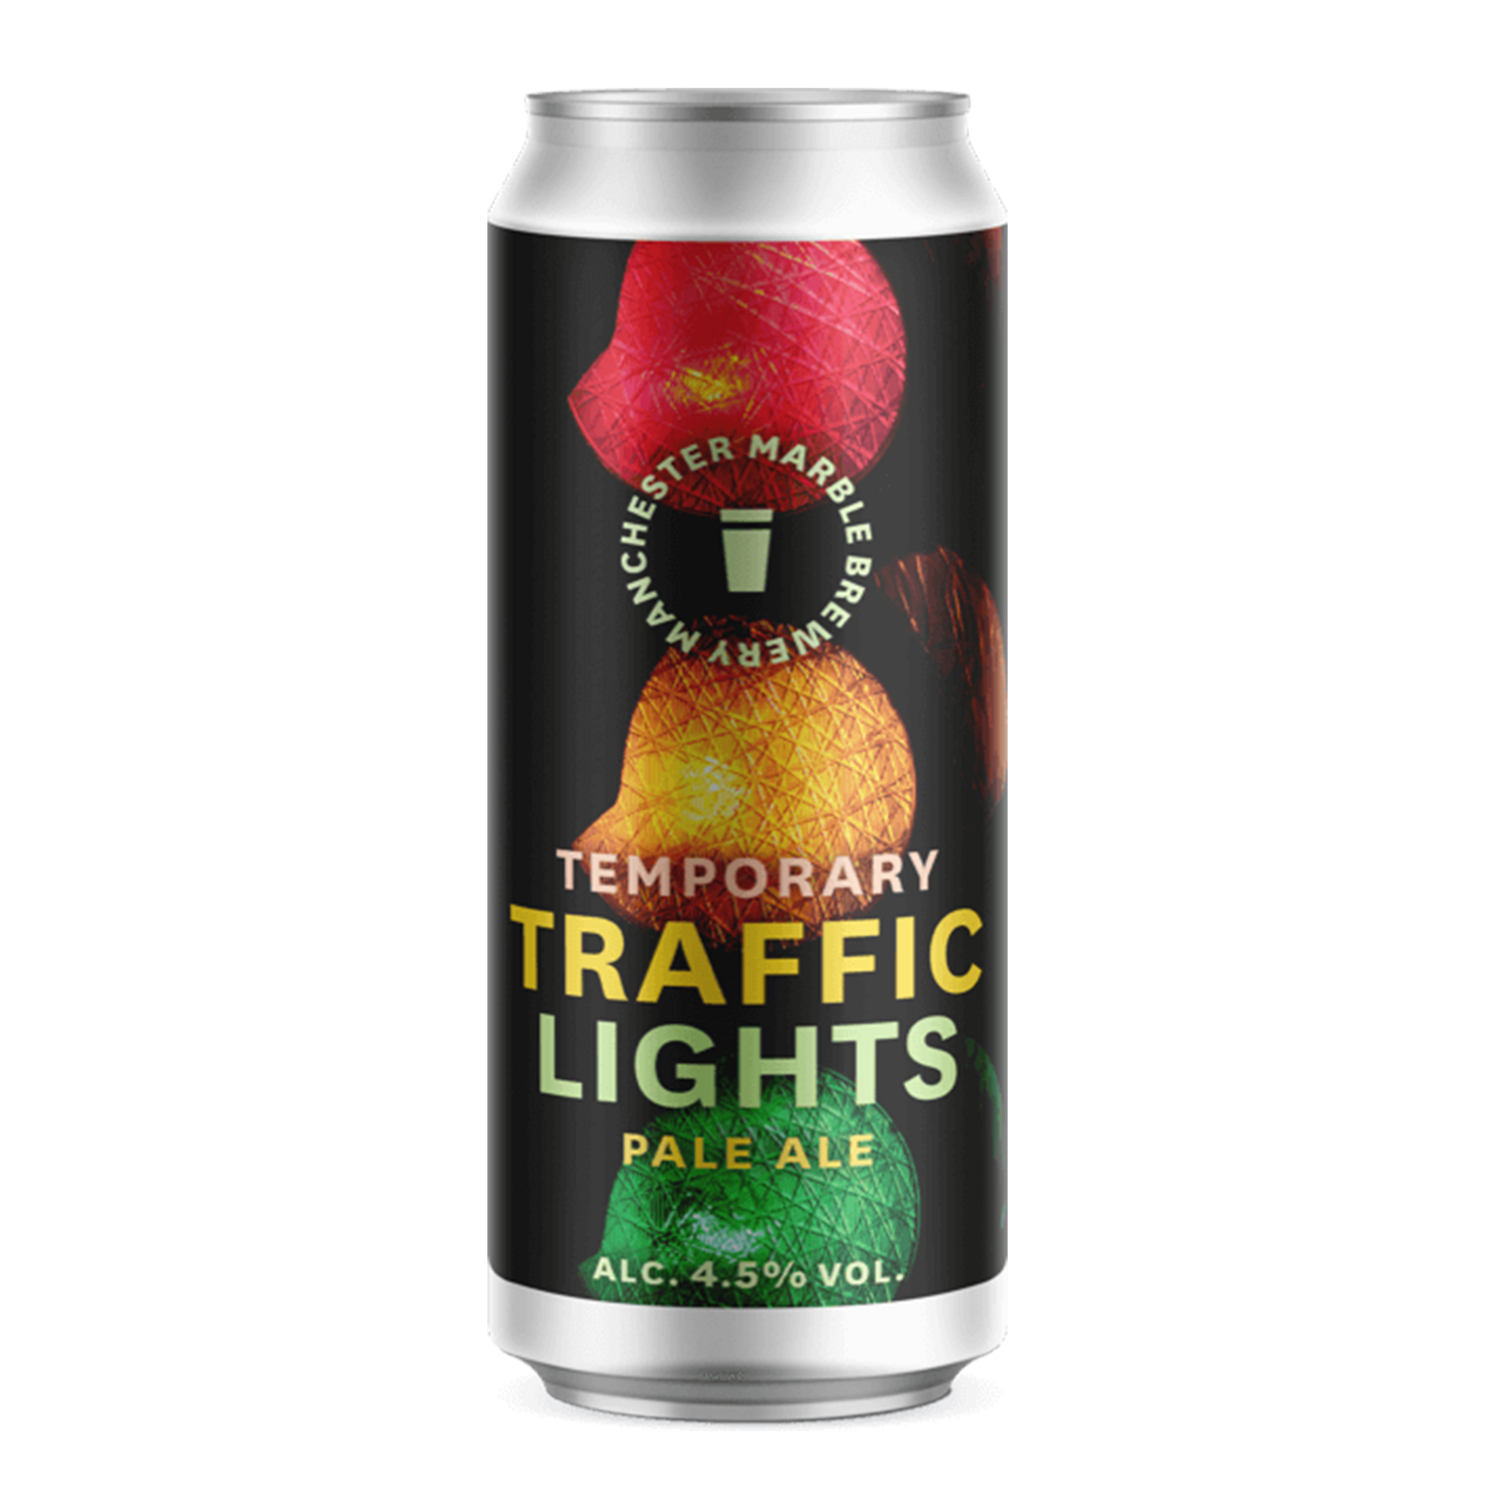 Marble Temporary Traffic Lights Pale Ale